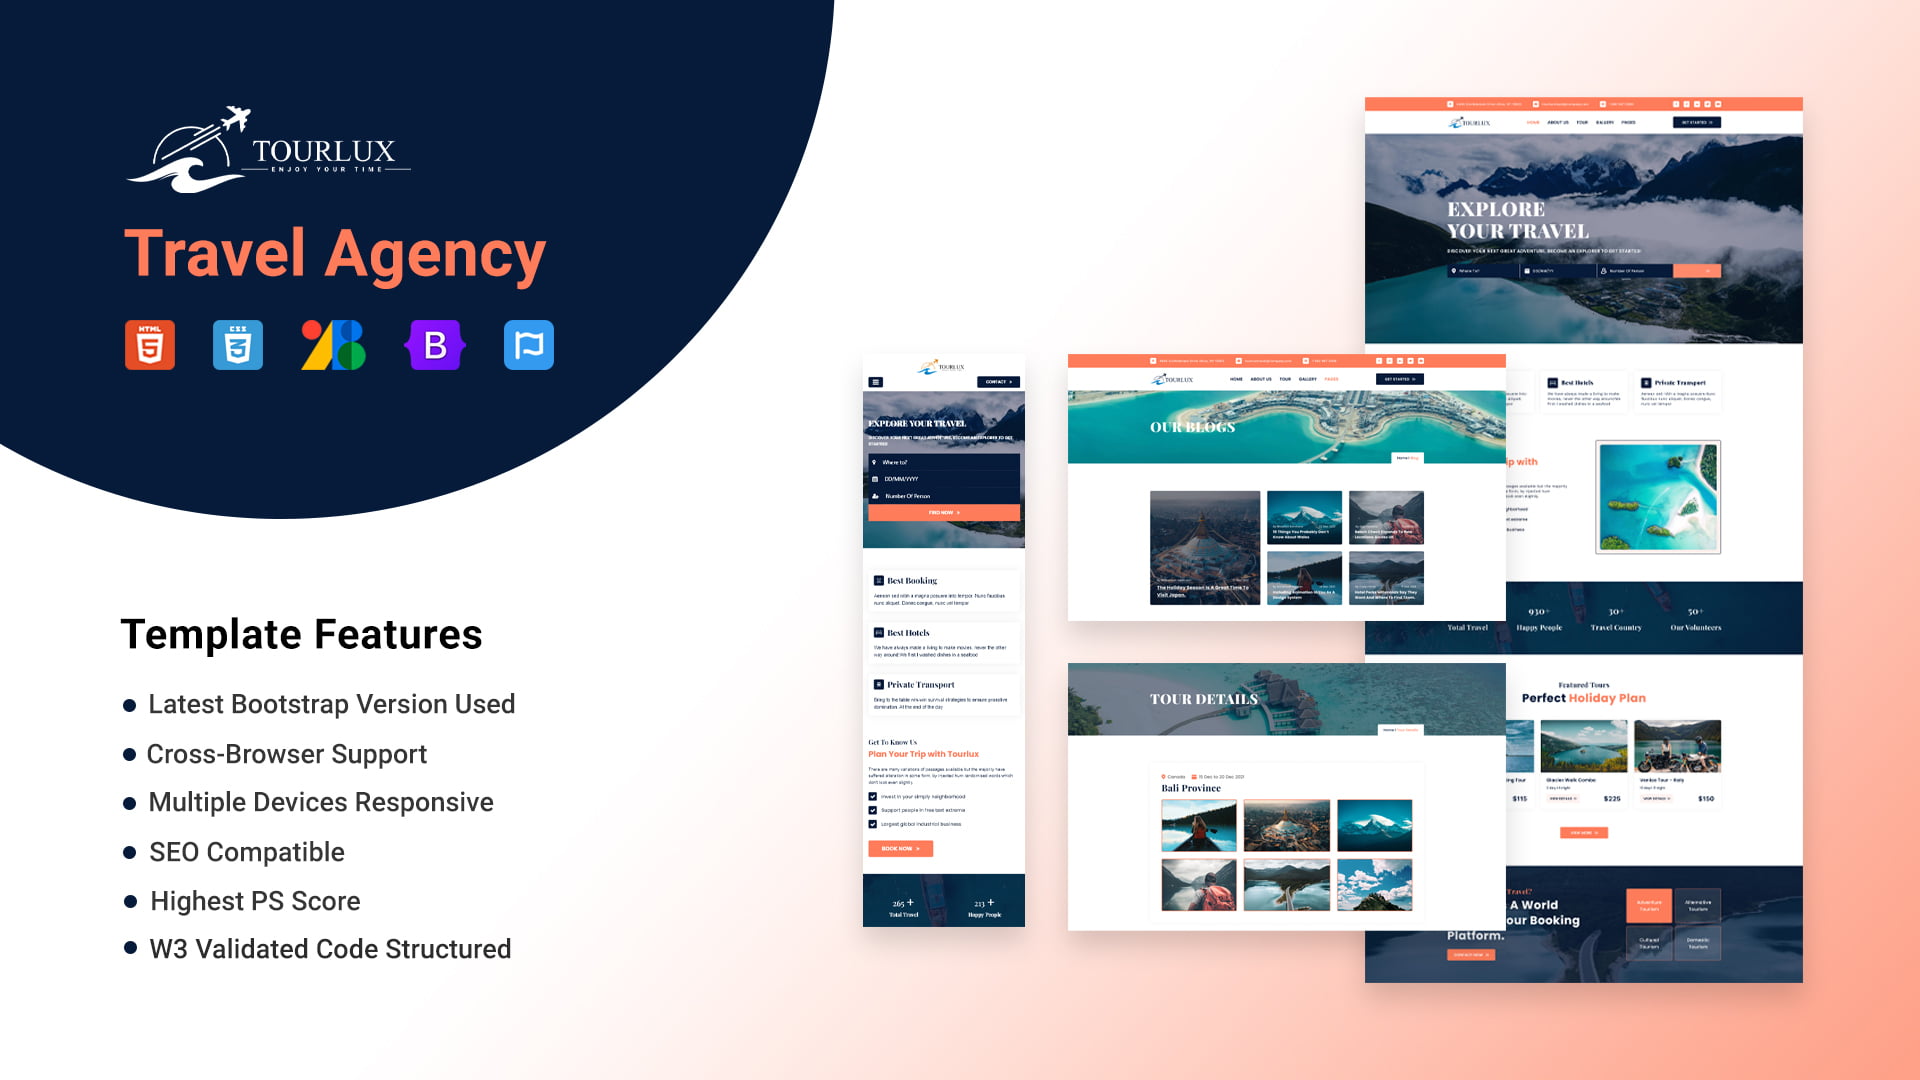 Tourlux - Travel Agency Bootstrap Template